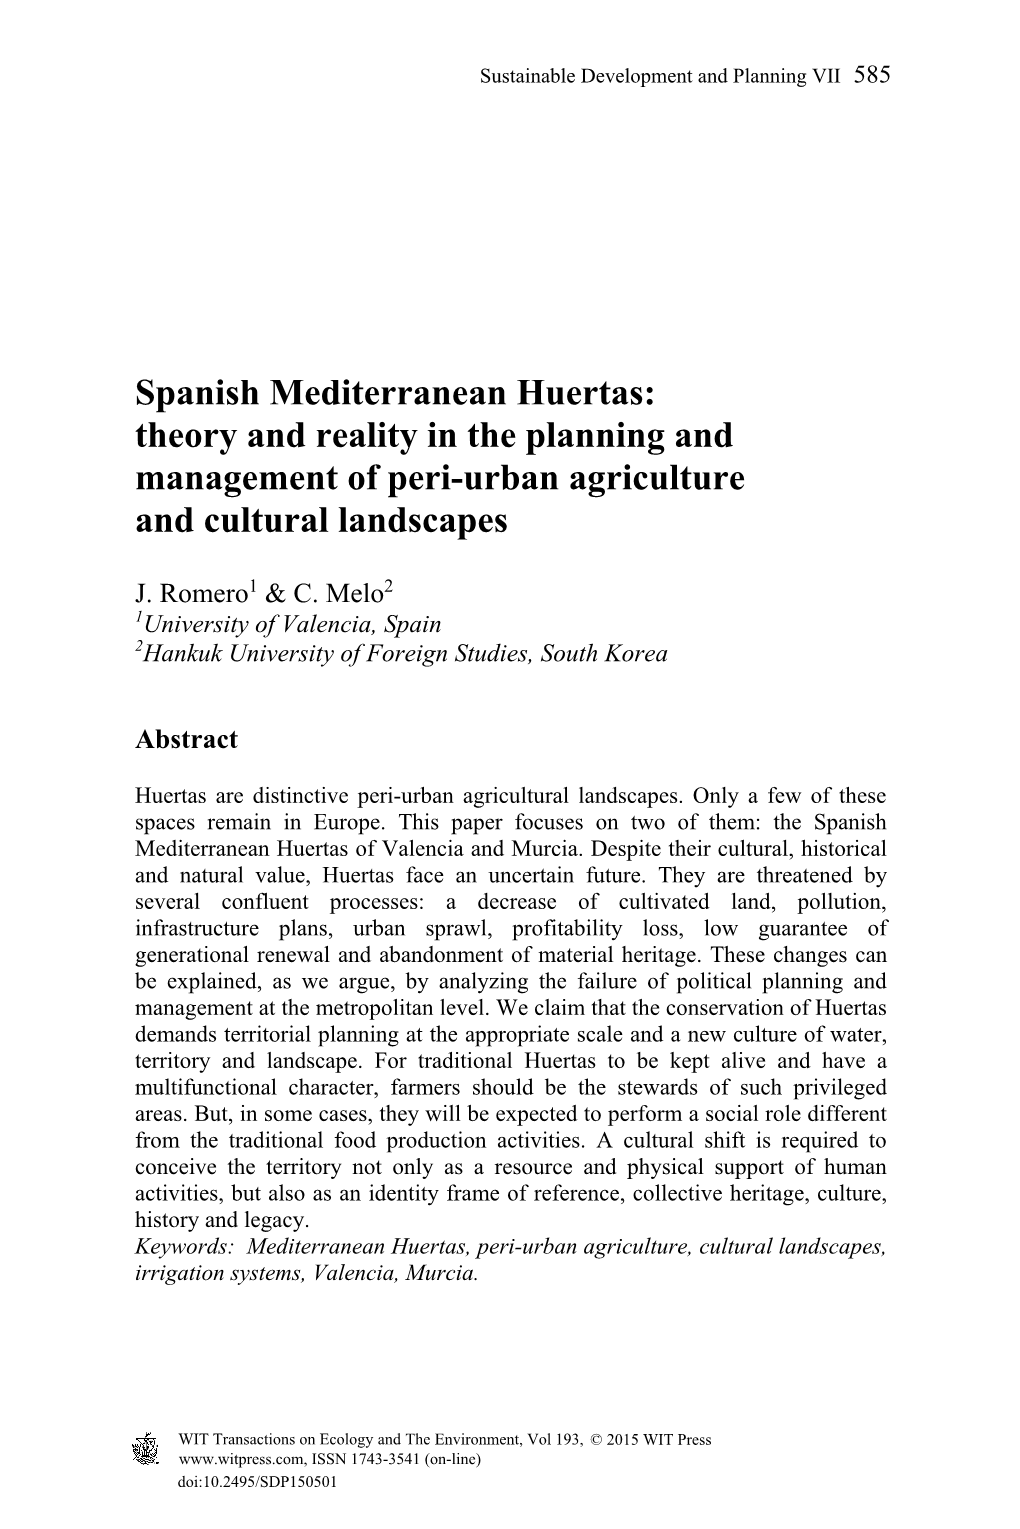 Spanish Mediterranean Huertas: Theory and Reality in the Planning and Management of Peri-Urban Agriculture and Cultural Landscapes